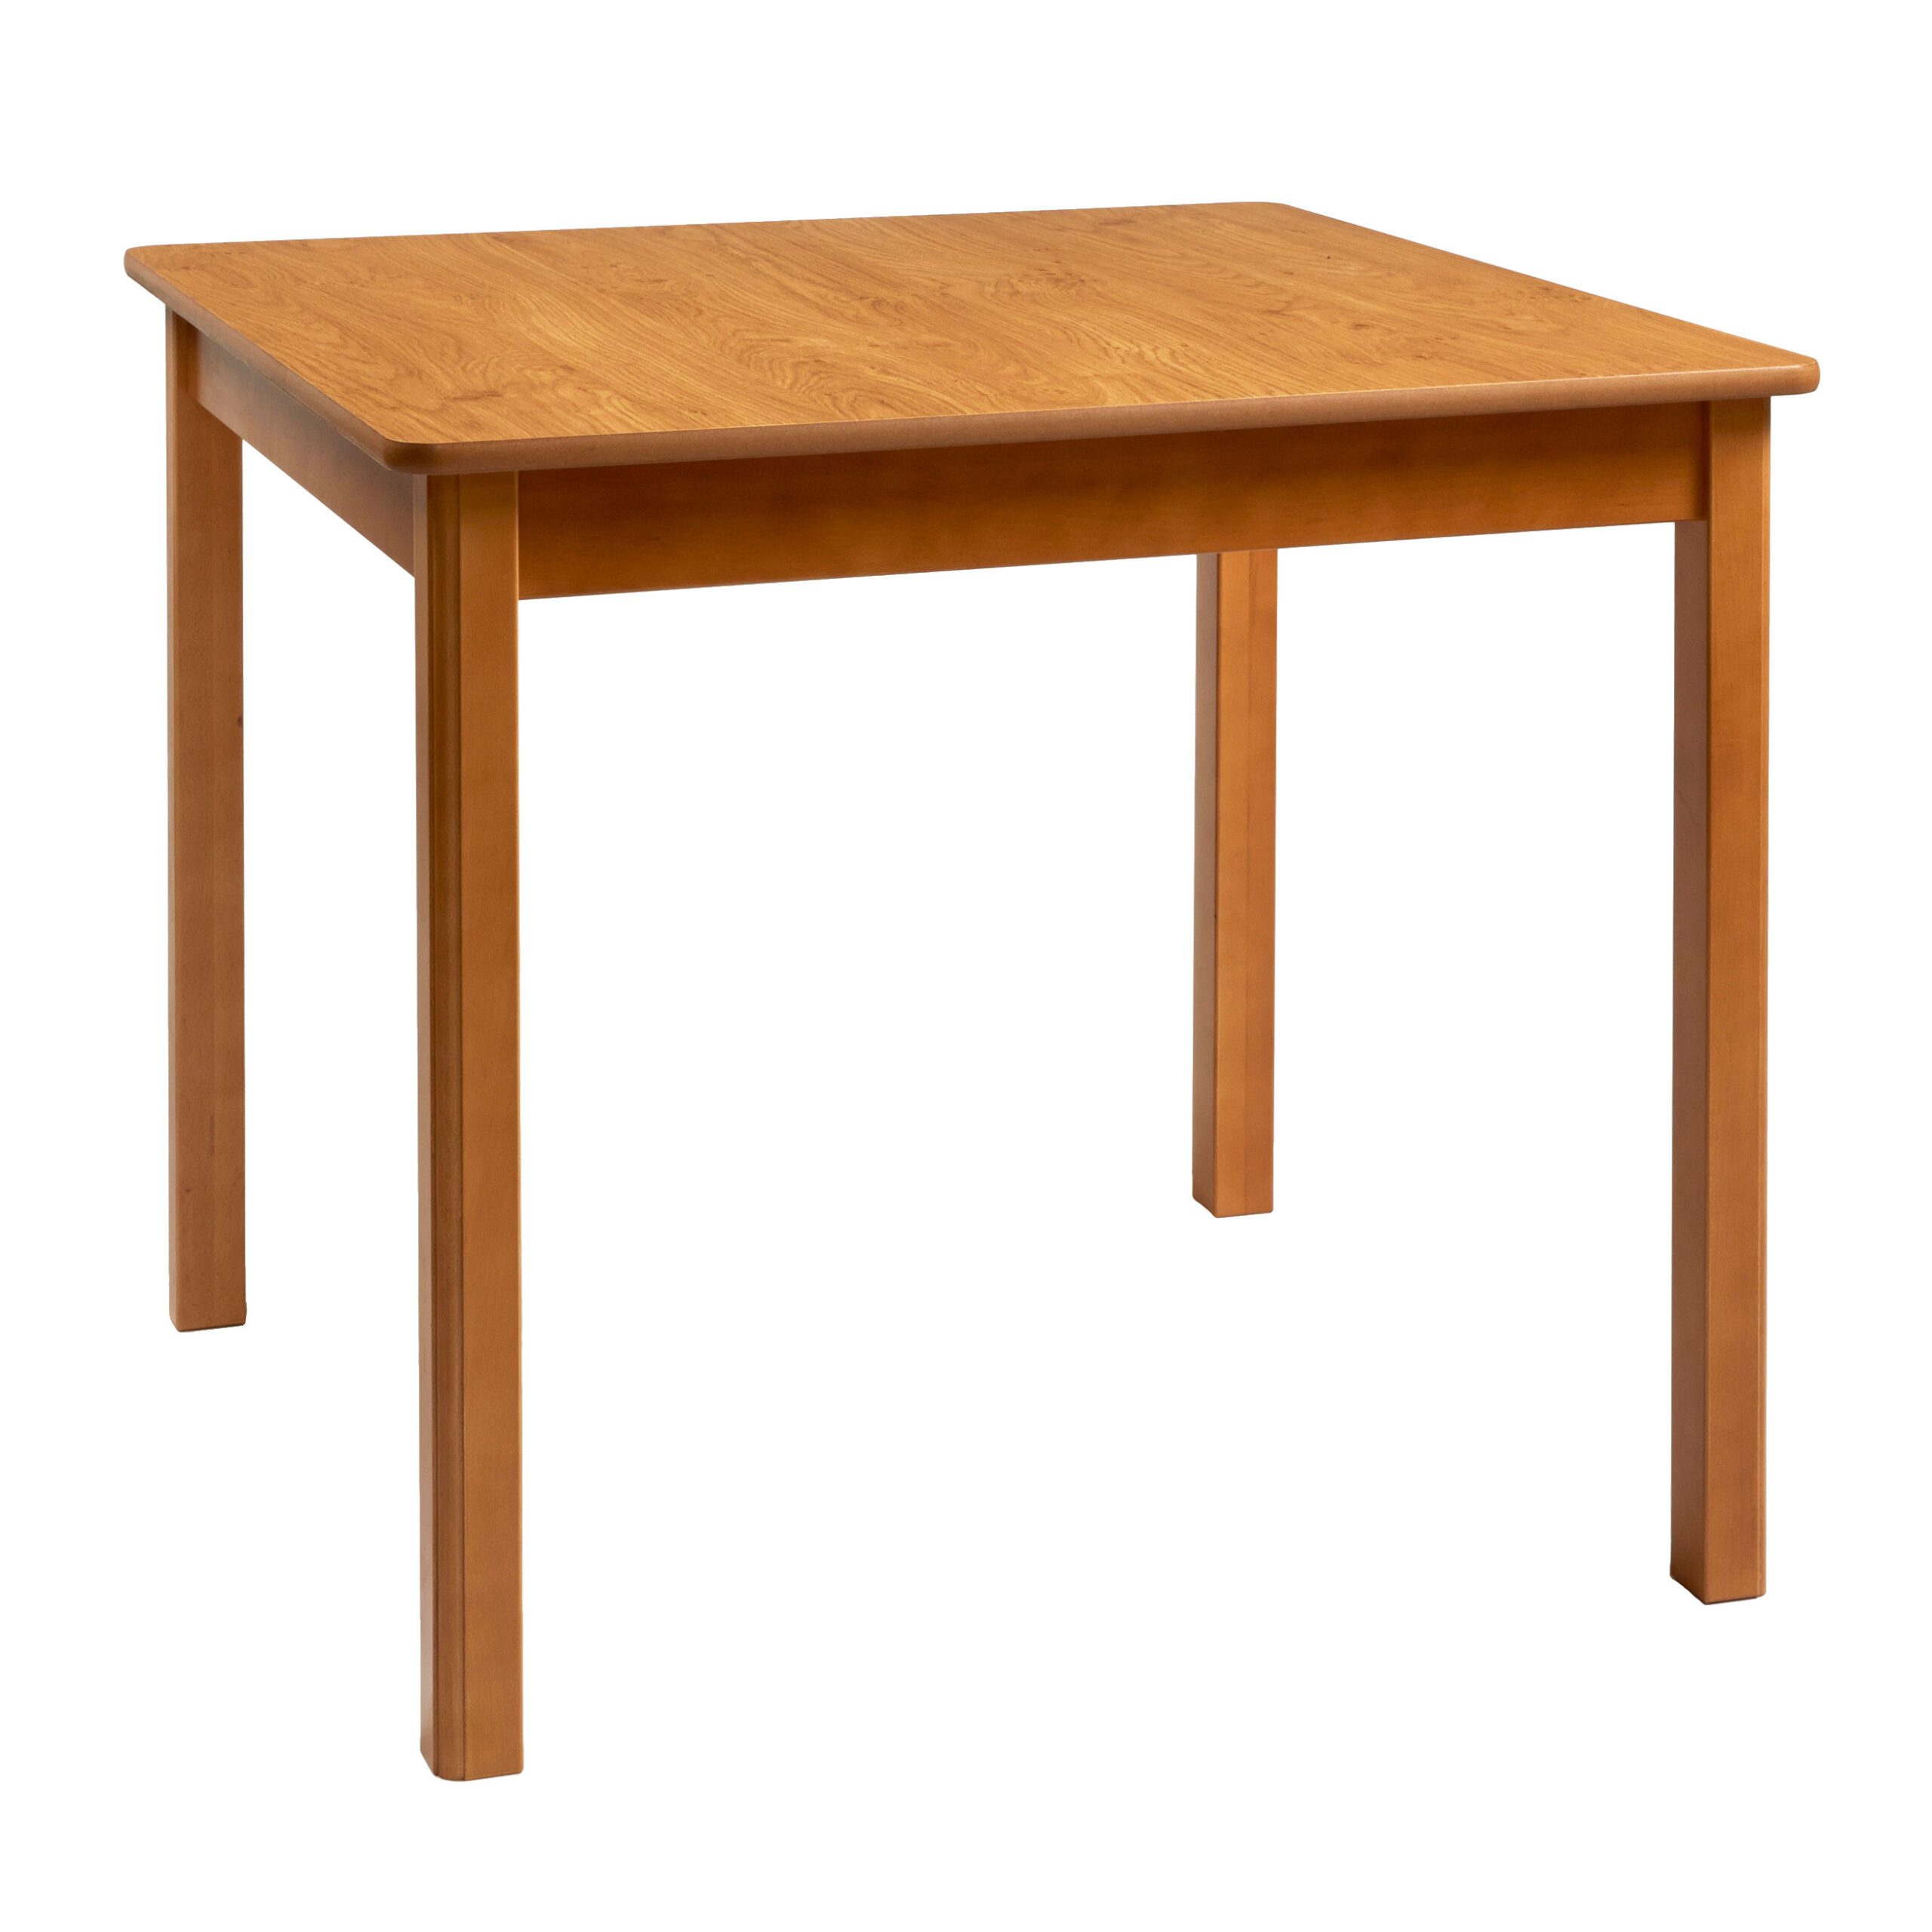 Earlwood Square 4 Seater Dining Table - oak